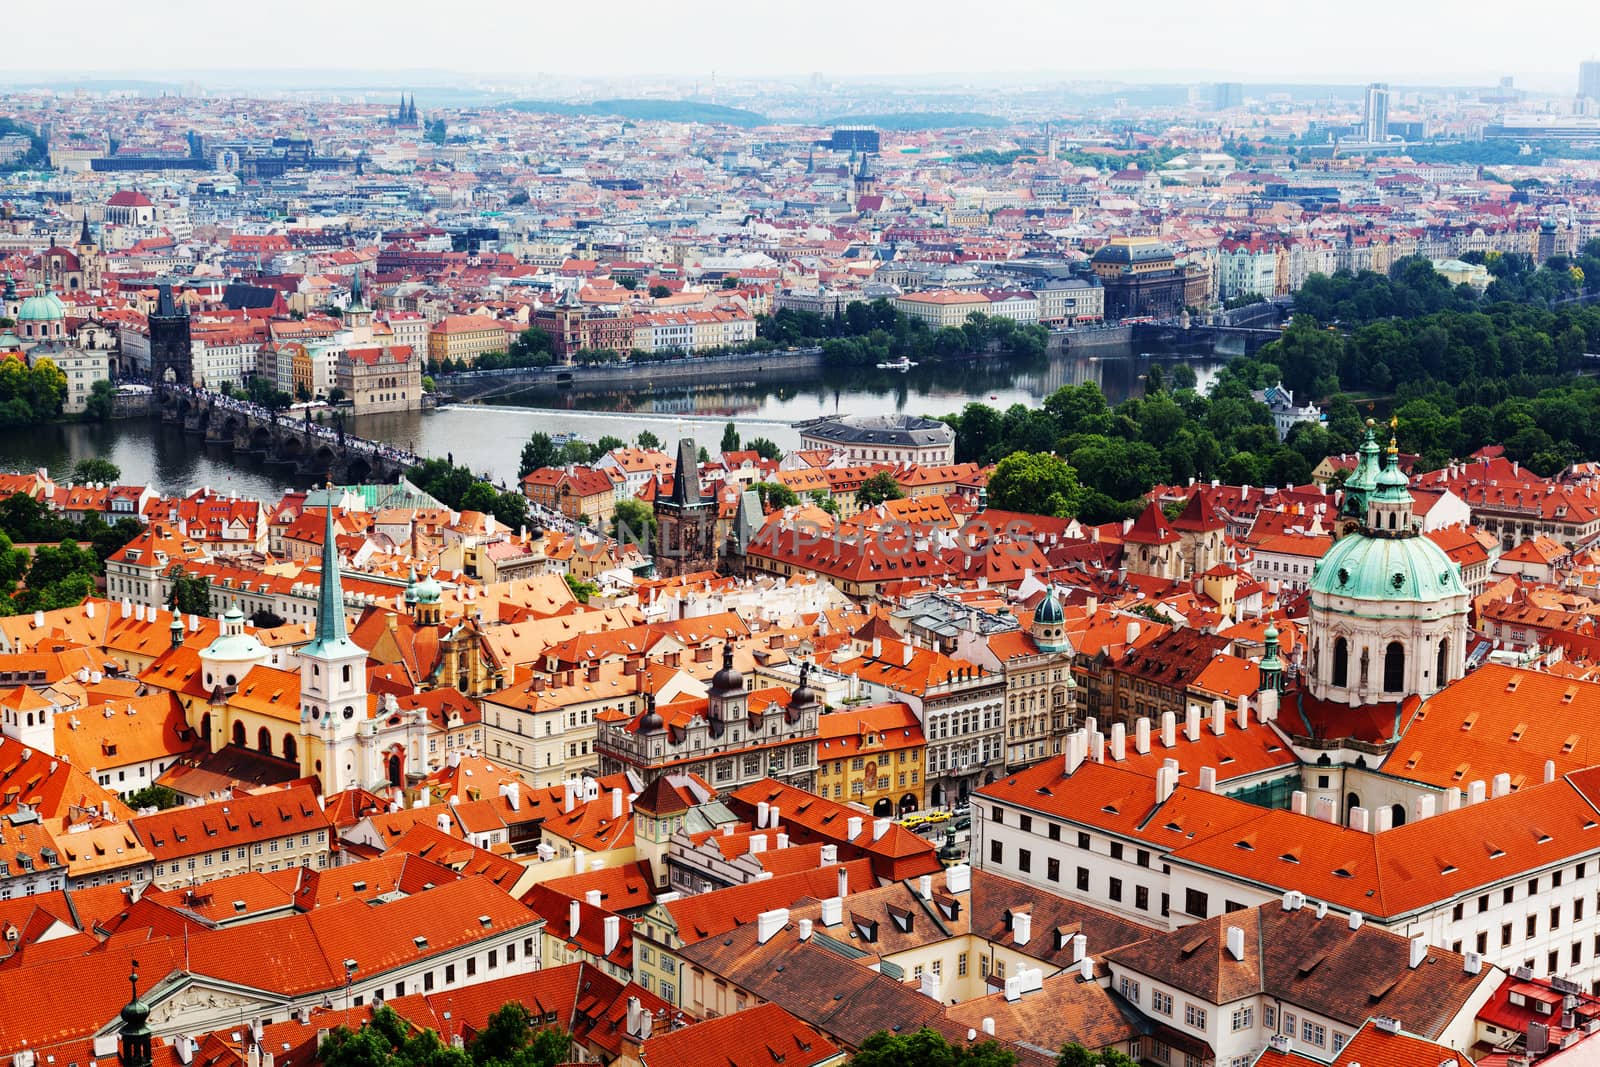 View of the historical districts of Prague from an observation deck